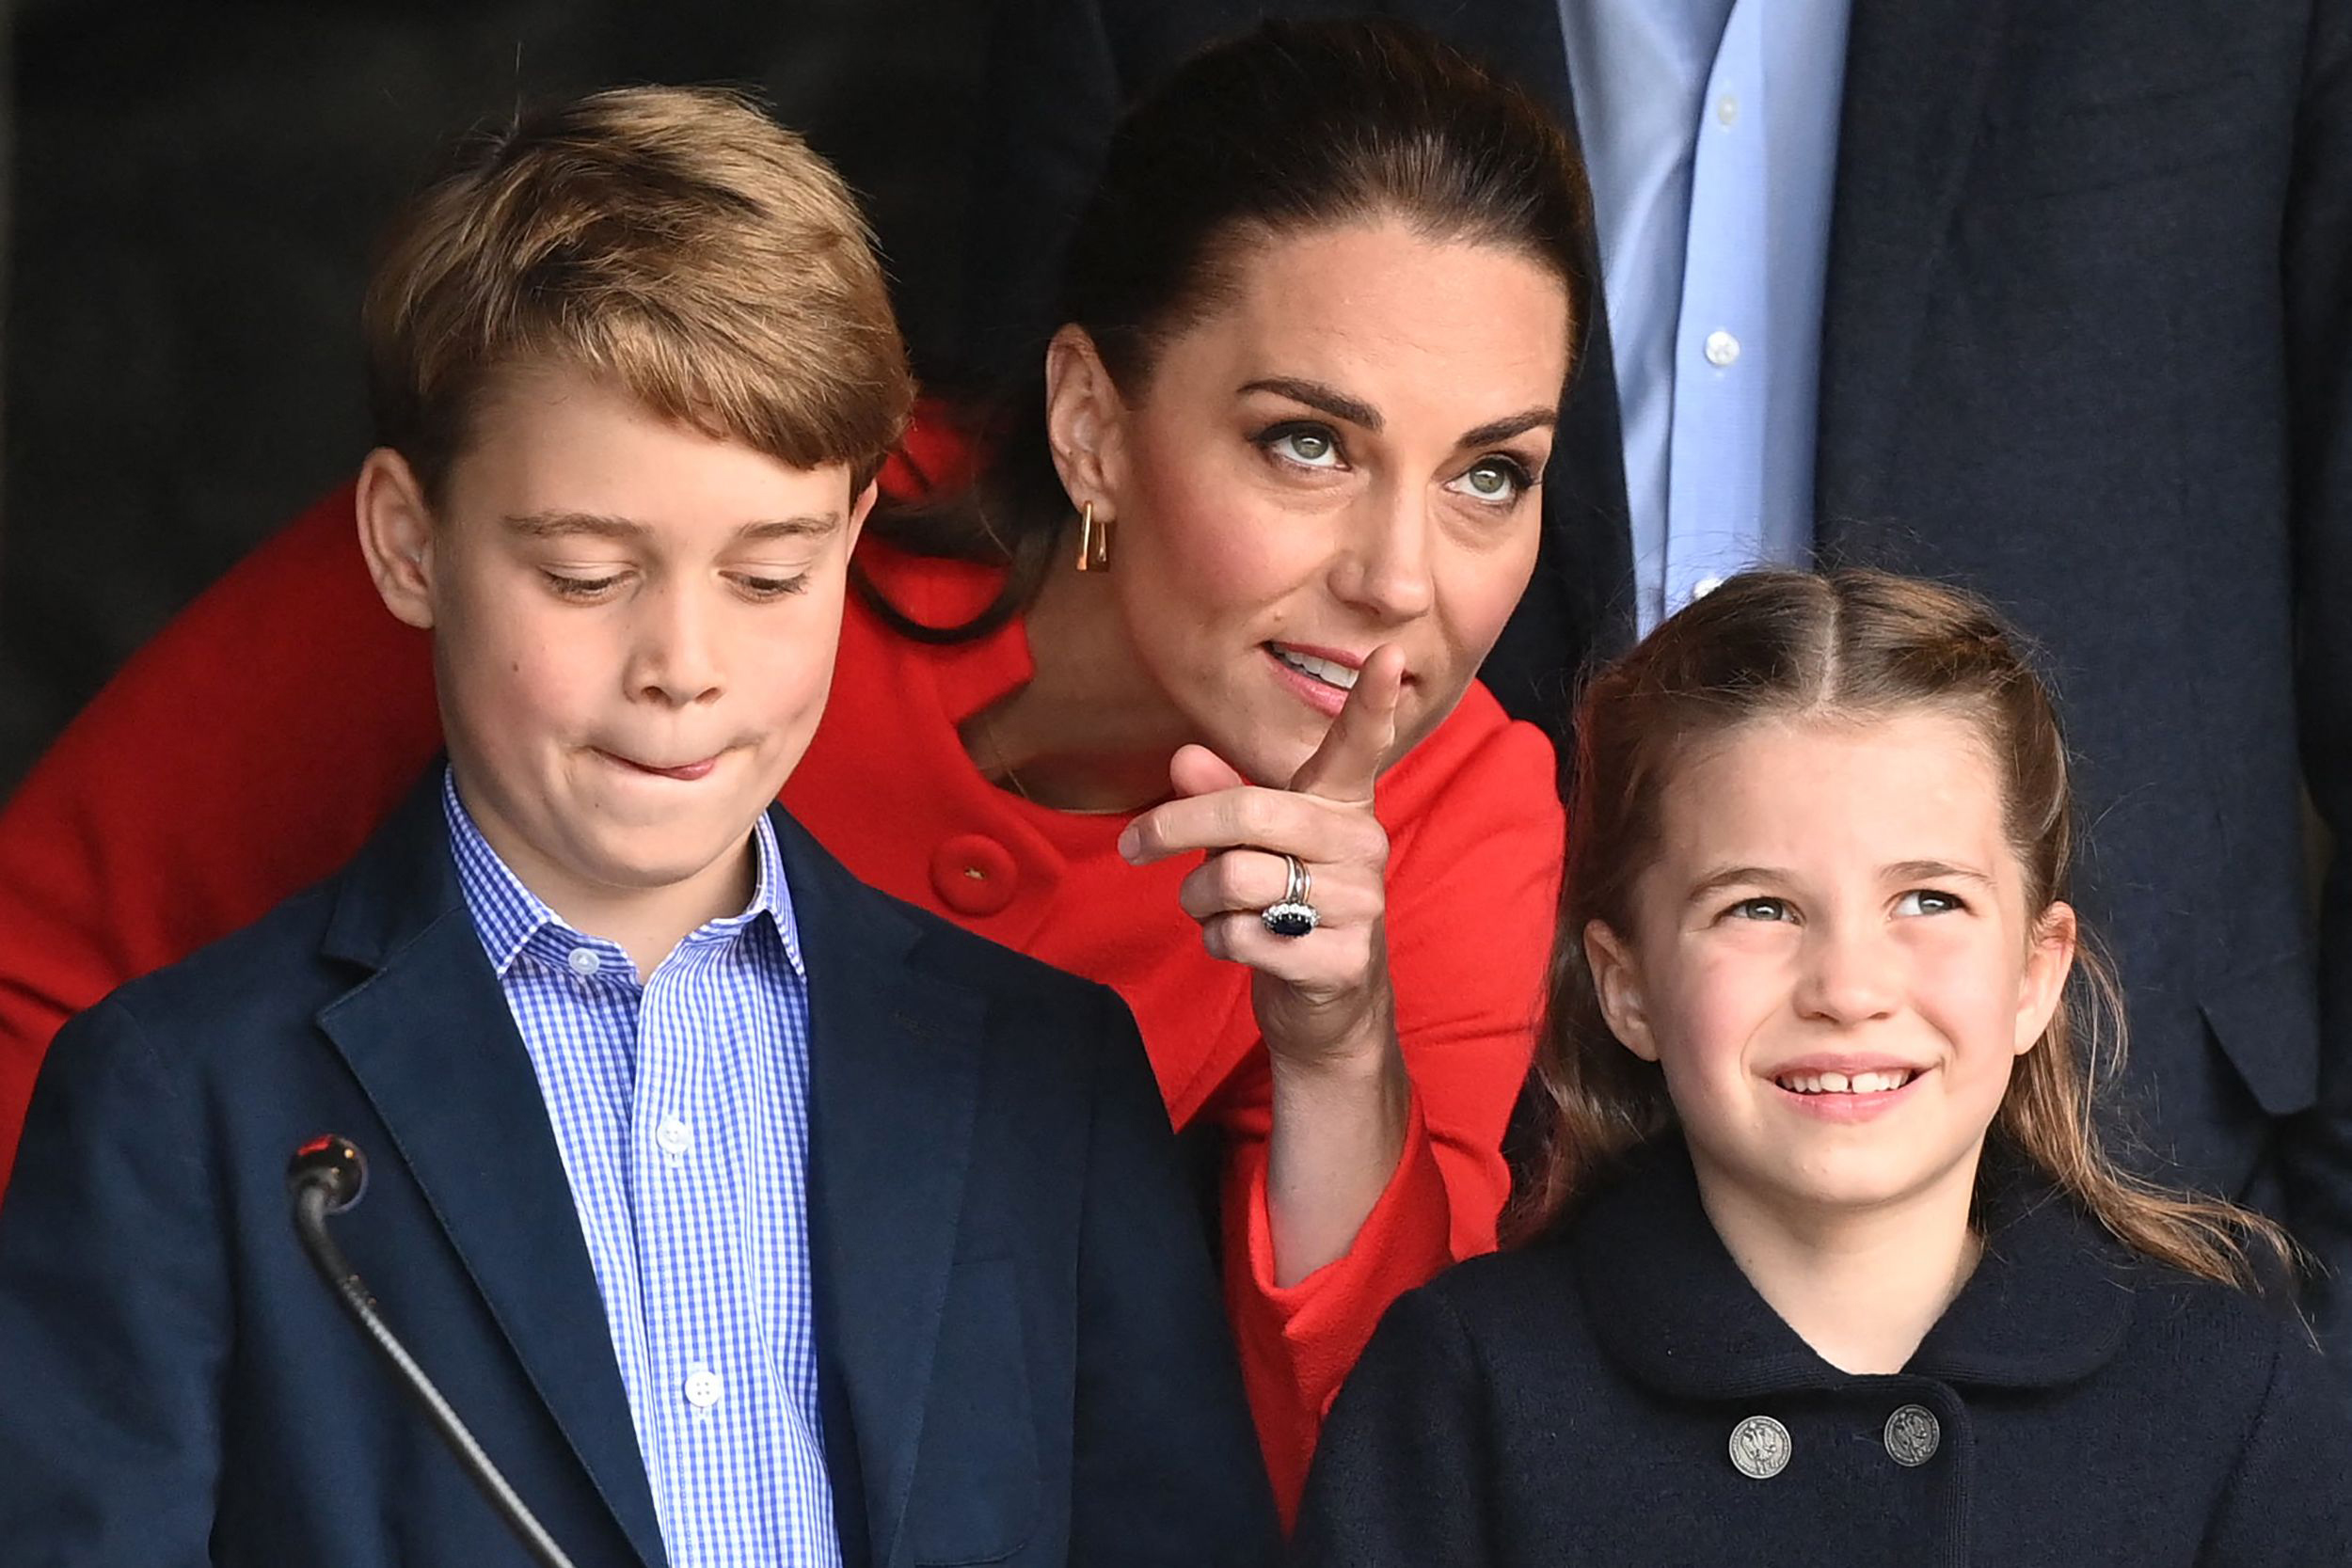 PHOTO: Catherine Duchess of Cambridge, speaks to her children Prince George and Princess Charlotte during a visit to Cardiff Castle in Wales, June 4, 2022, as part of the royal family's tour for Queen Elizabeth II's platinum jubilee celebrations.